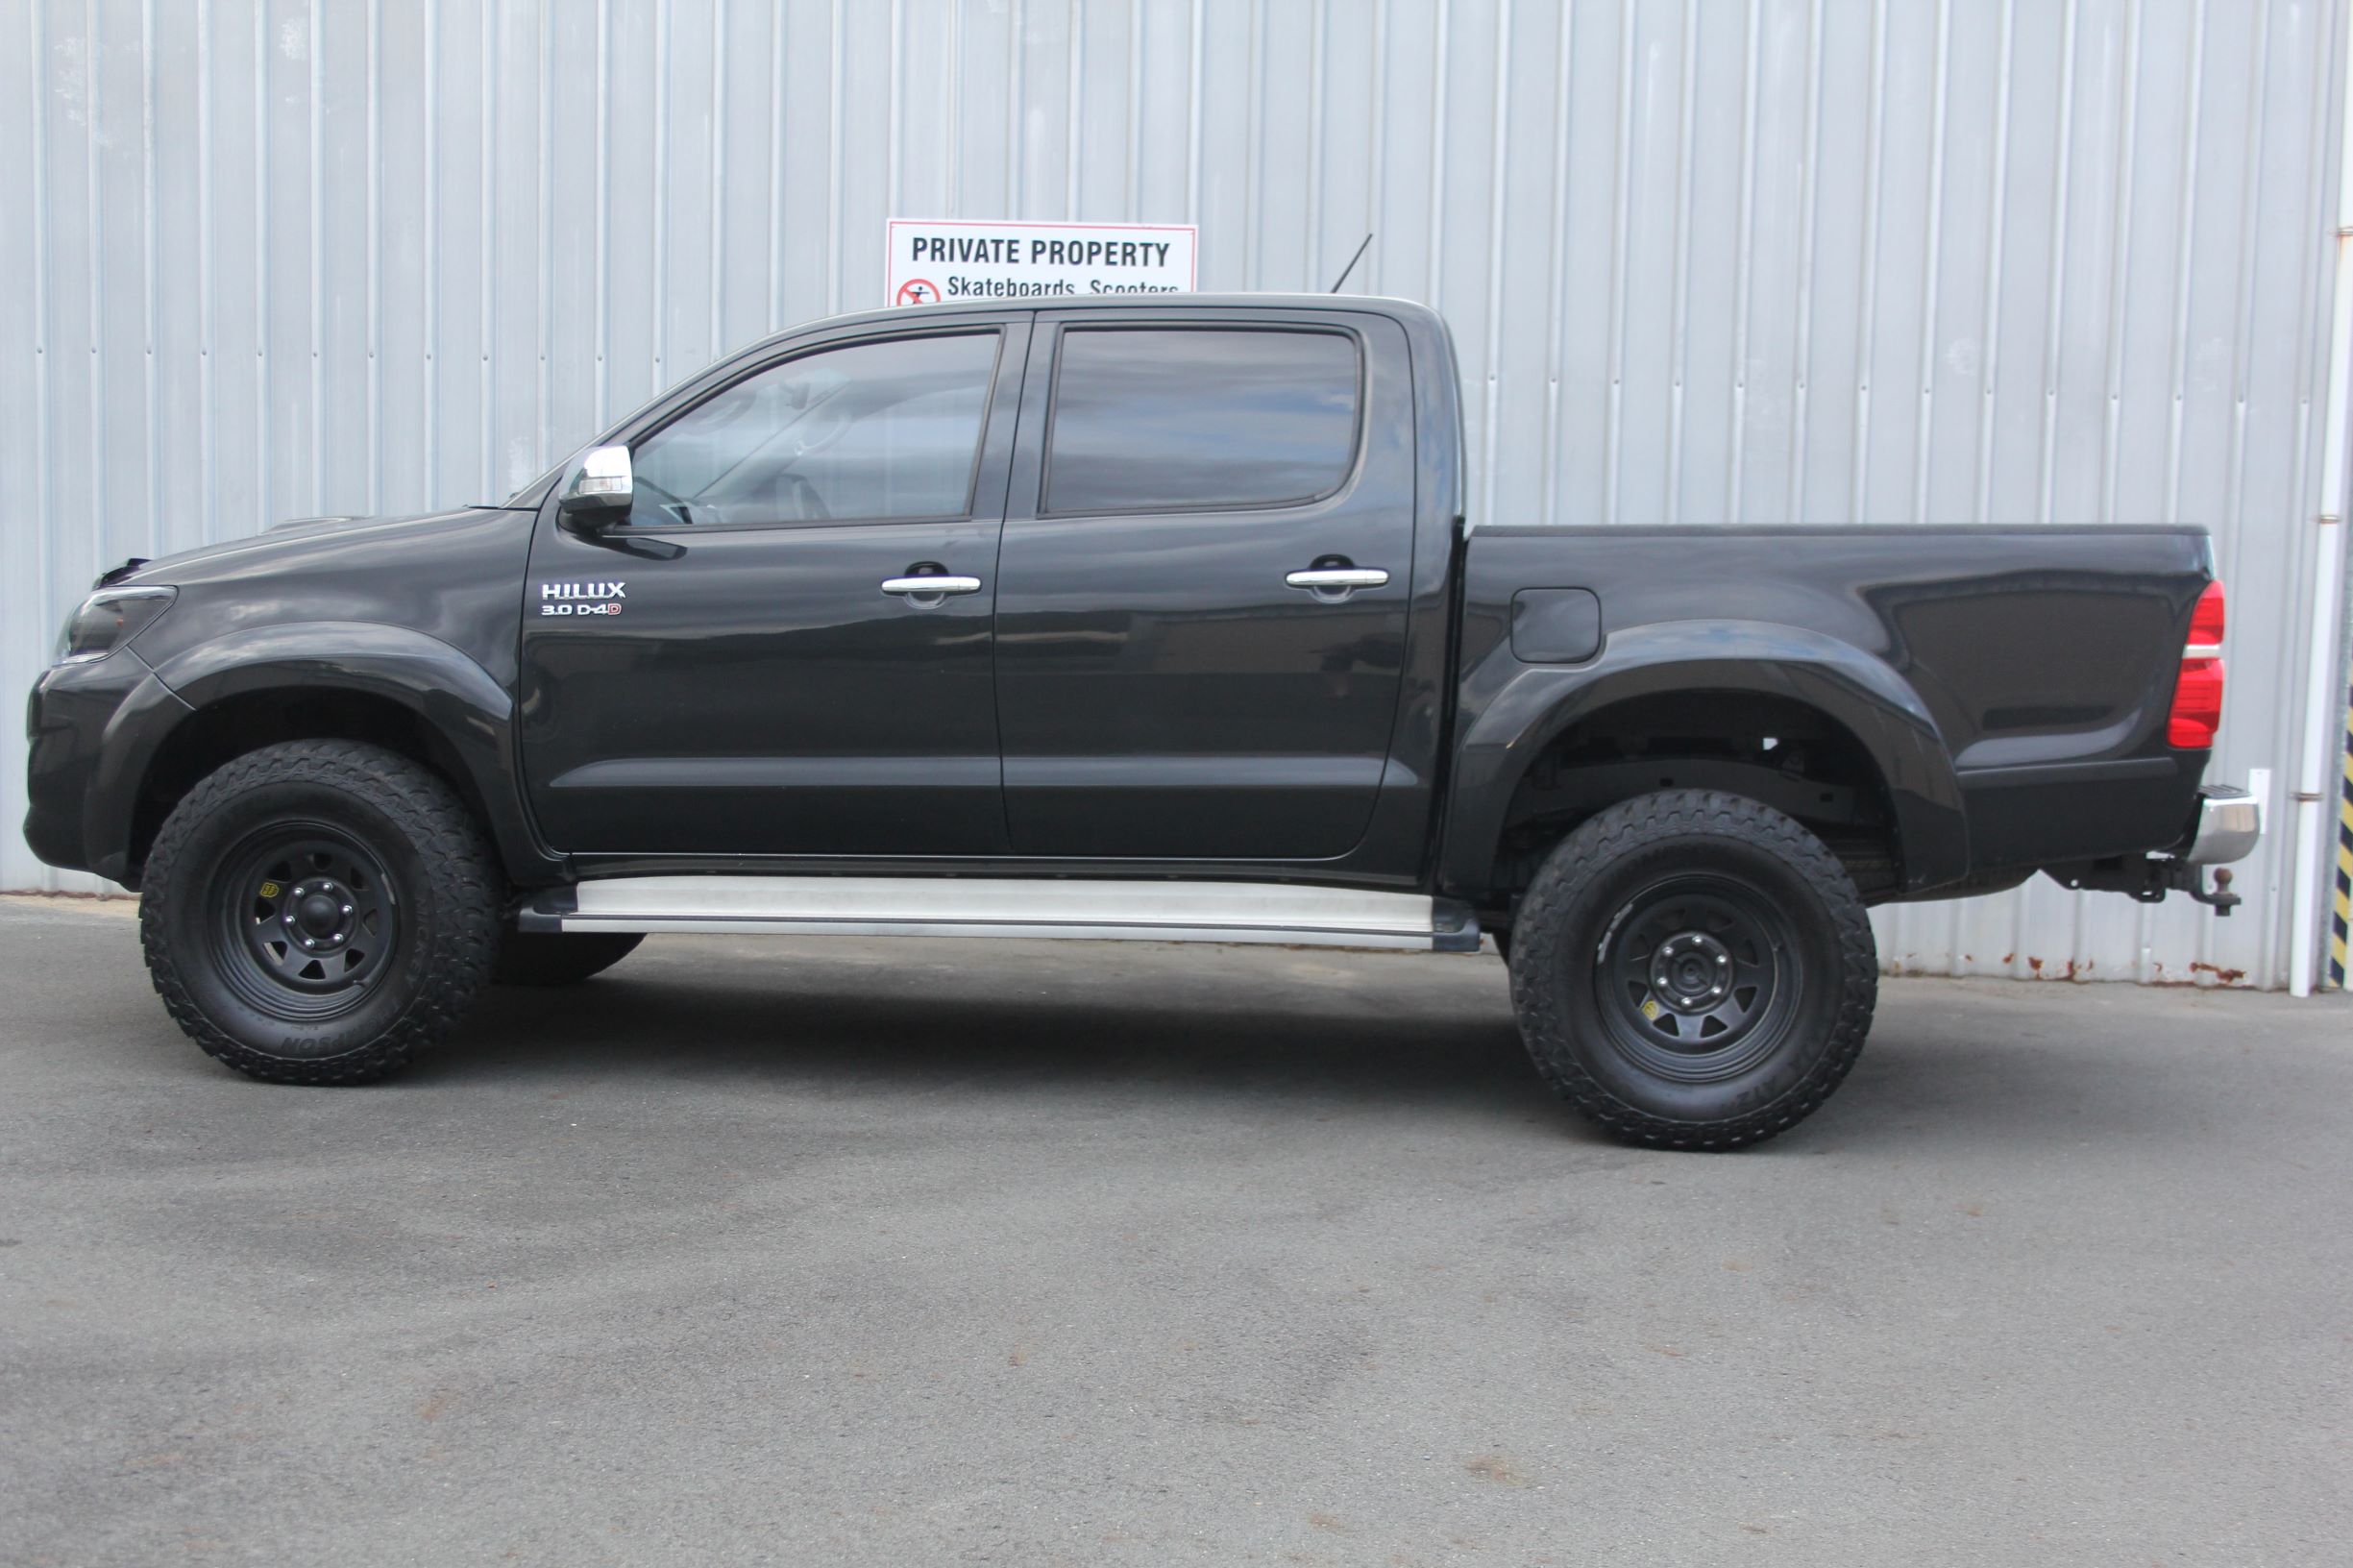 Toyota Hilux 4WD manual SR5 2013 for sale in Auckland